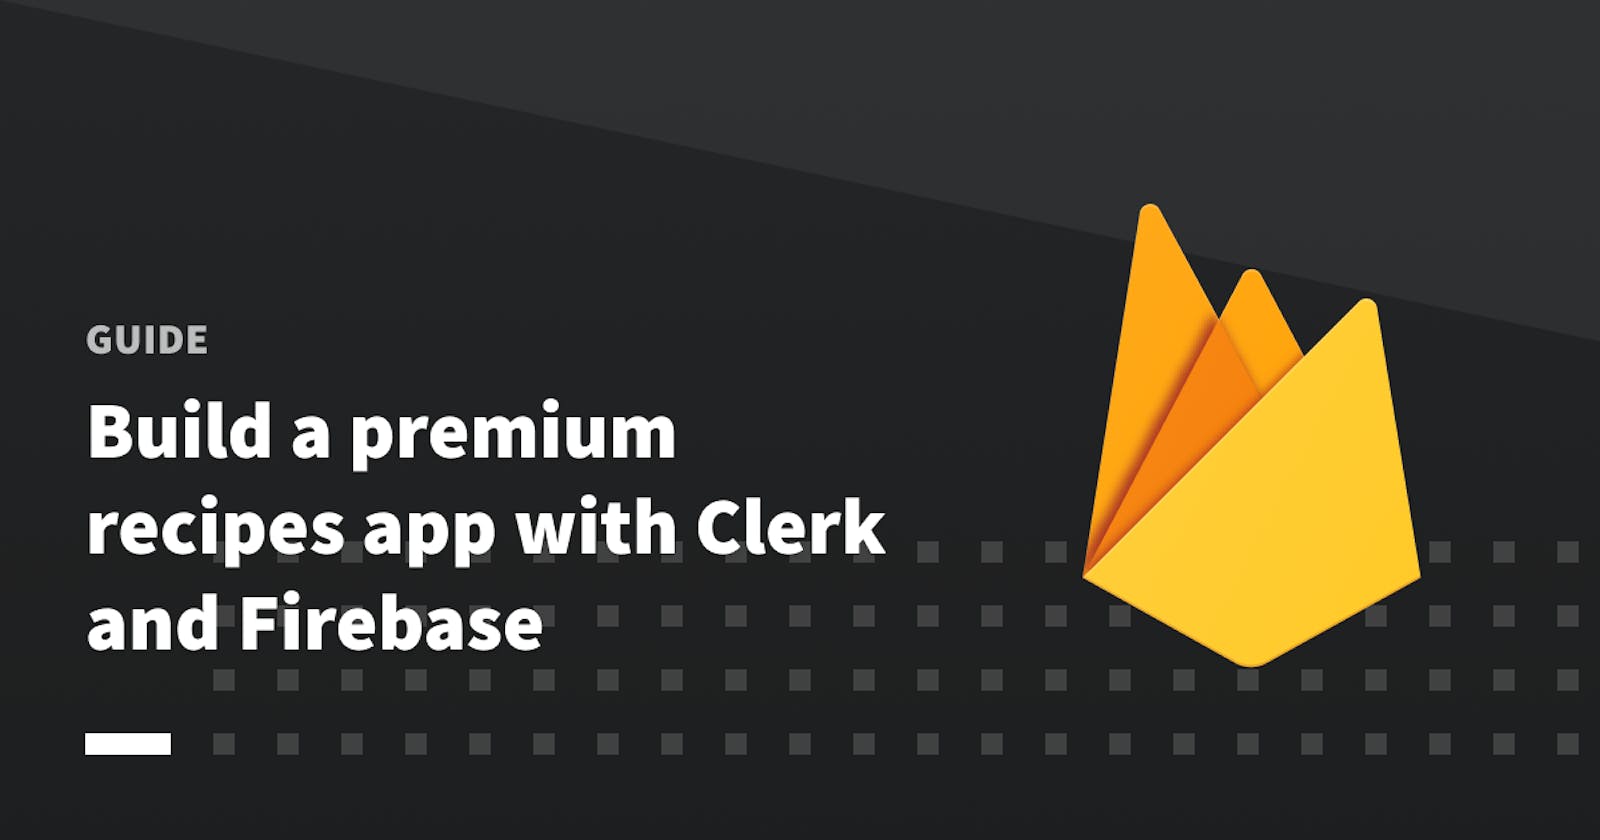 Build a premium recipes app with Clerk and Firebase🔥